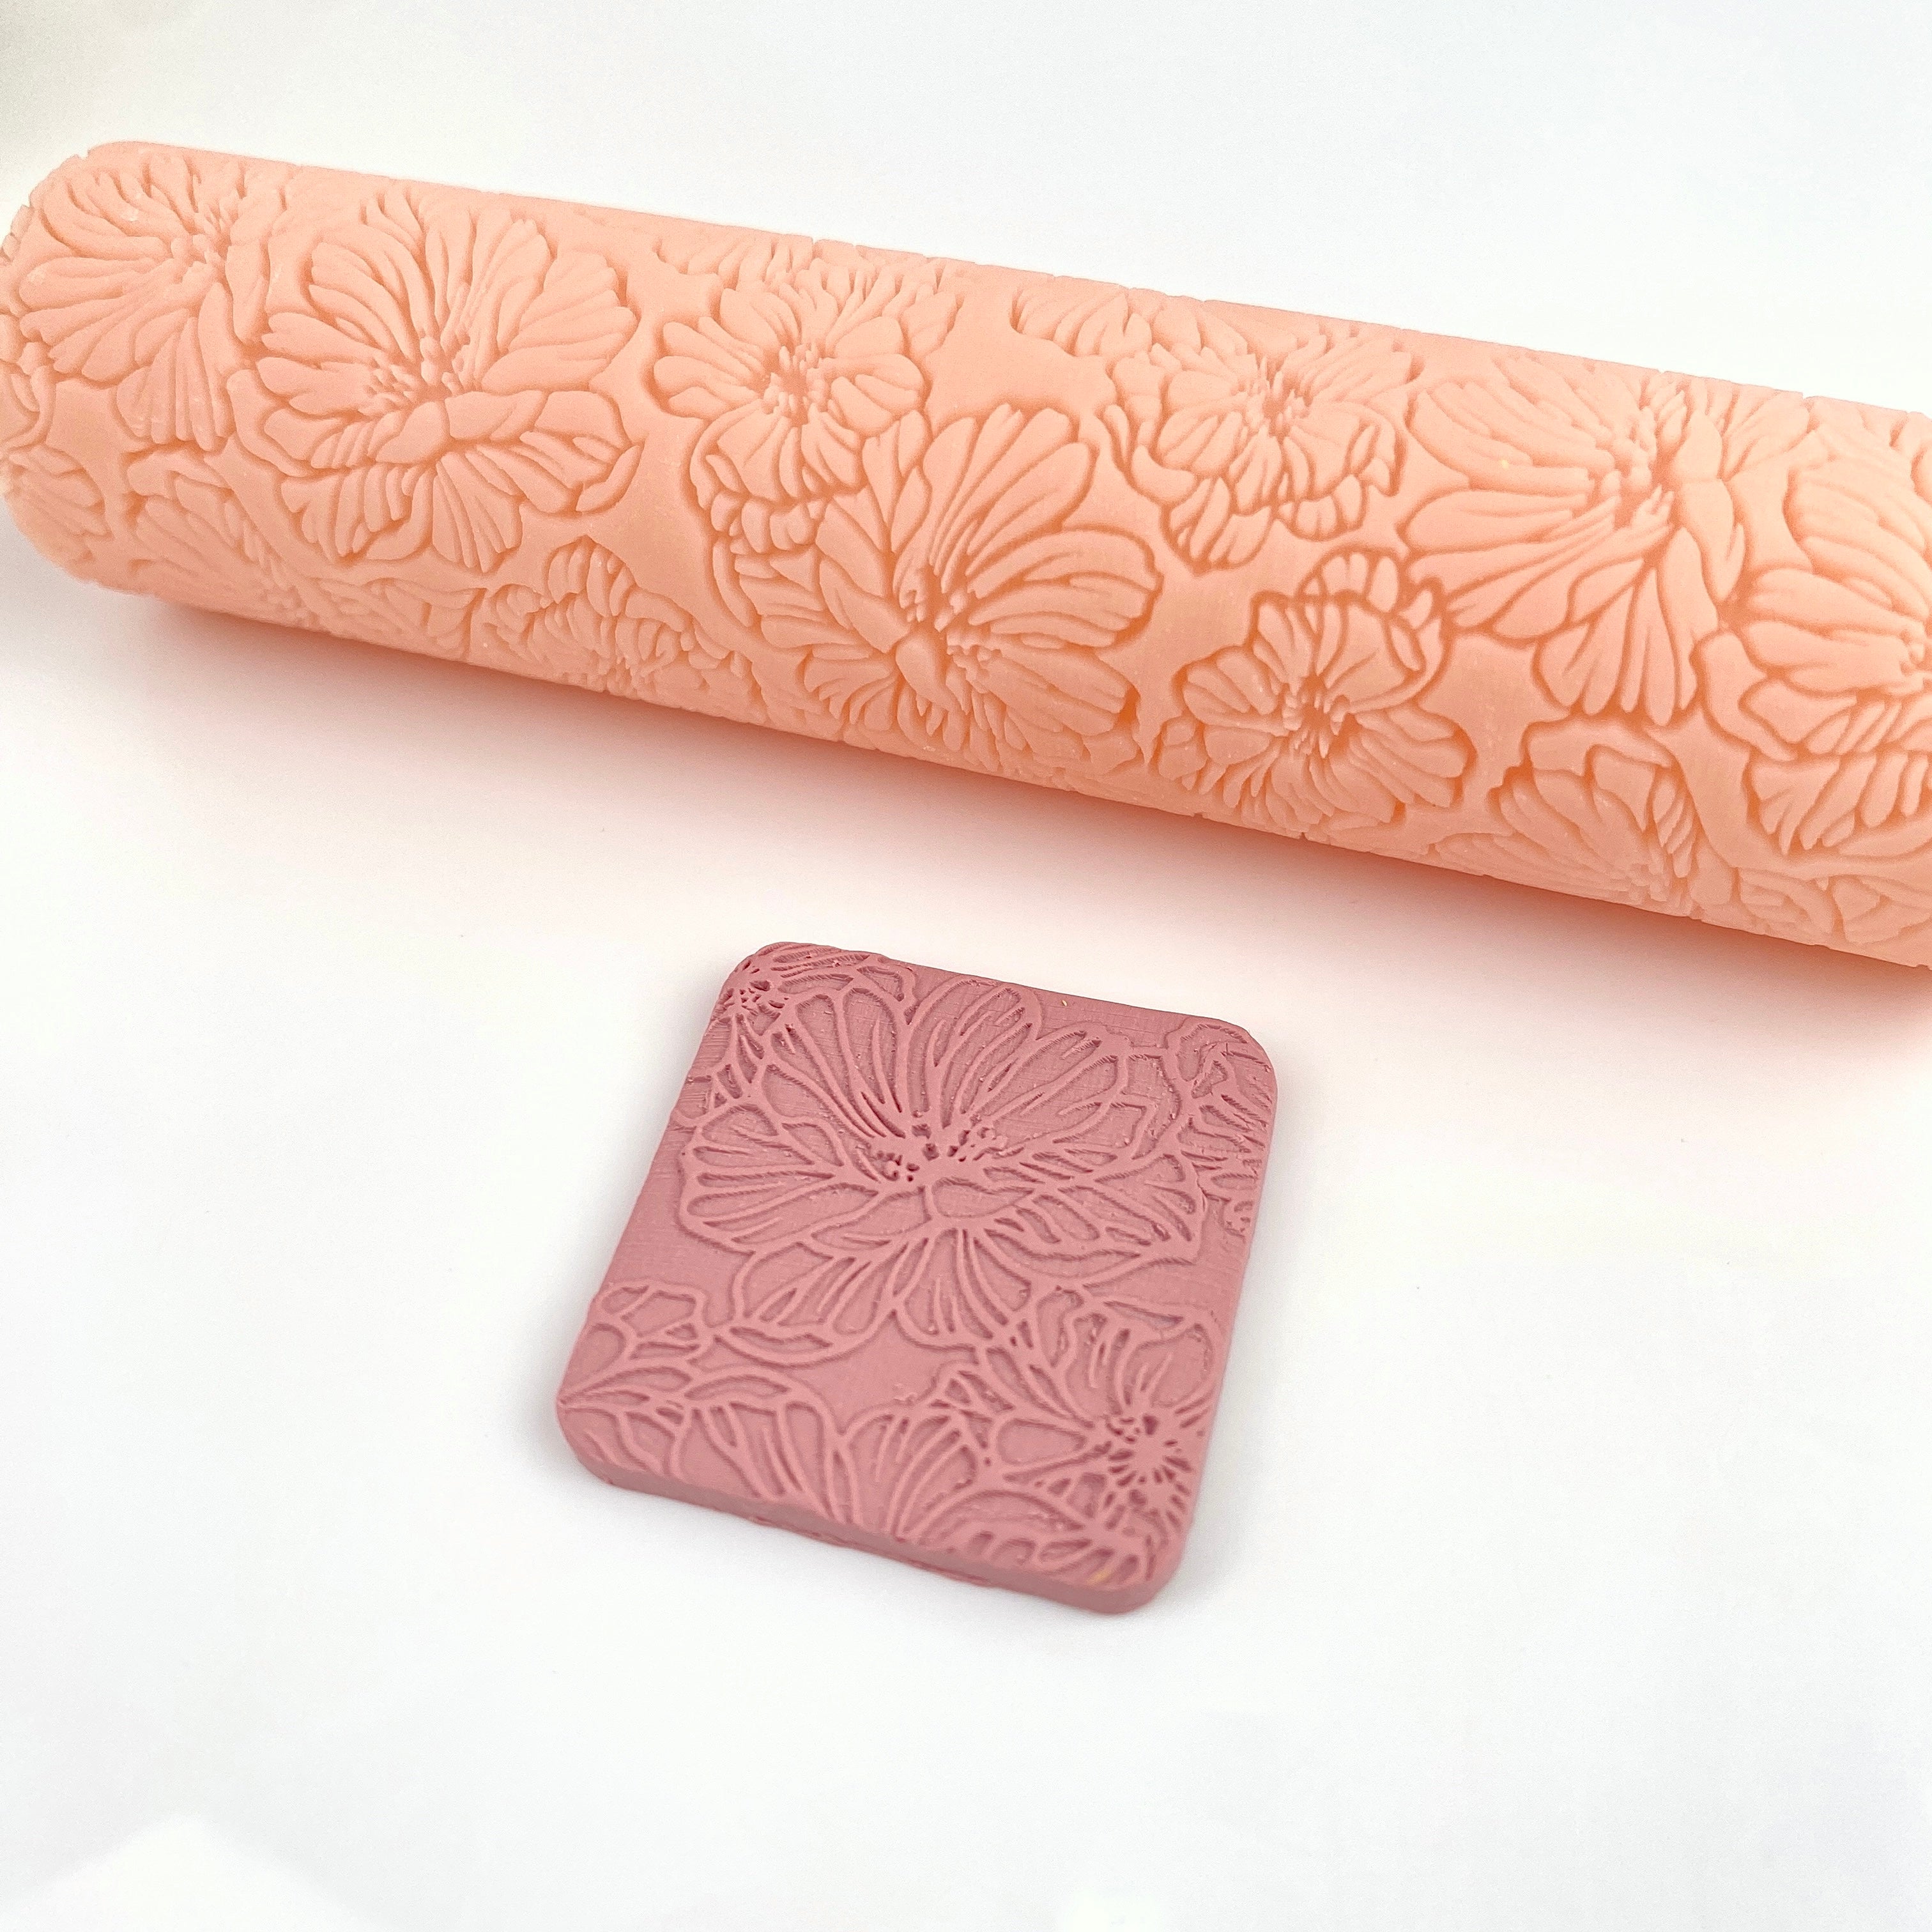 Roses Flowers Texture Roller for Clay